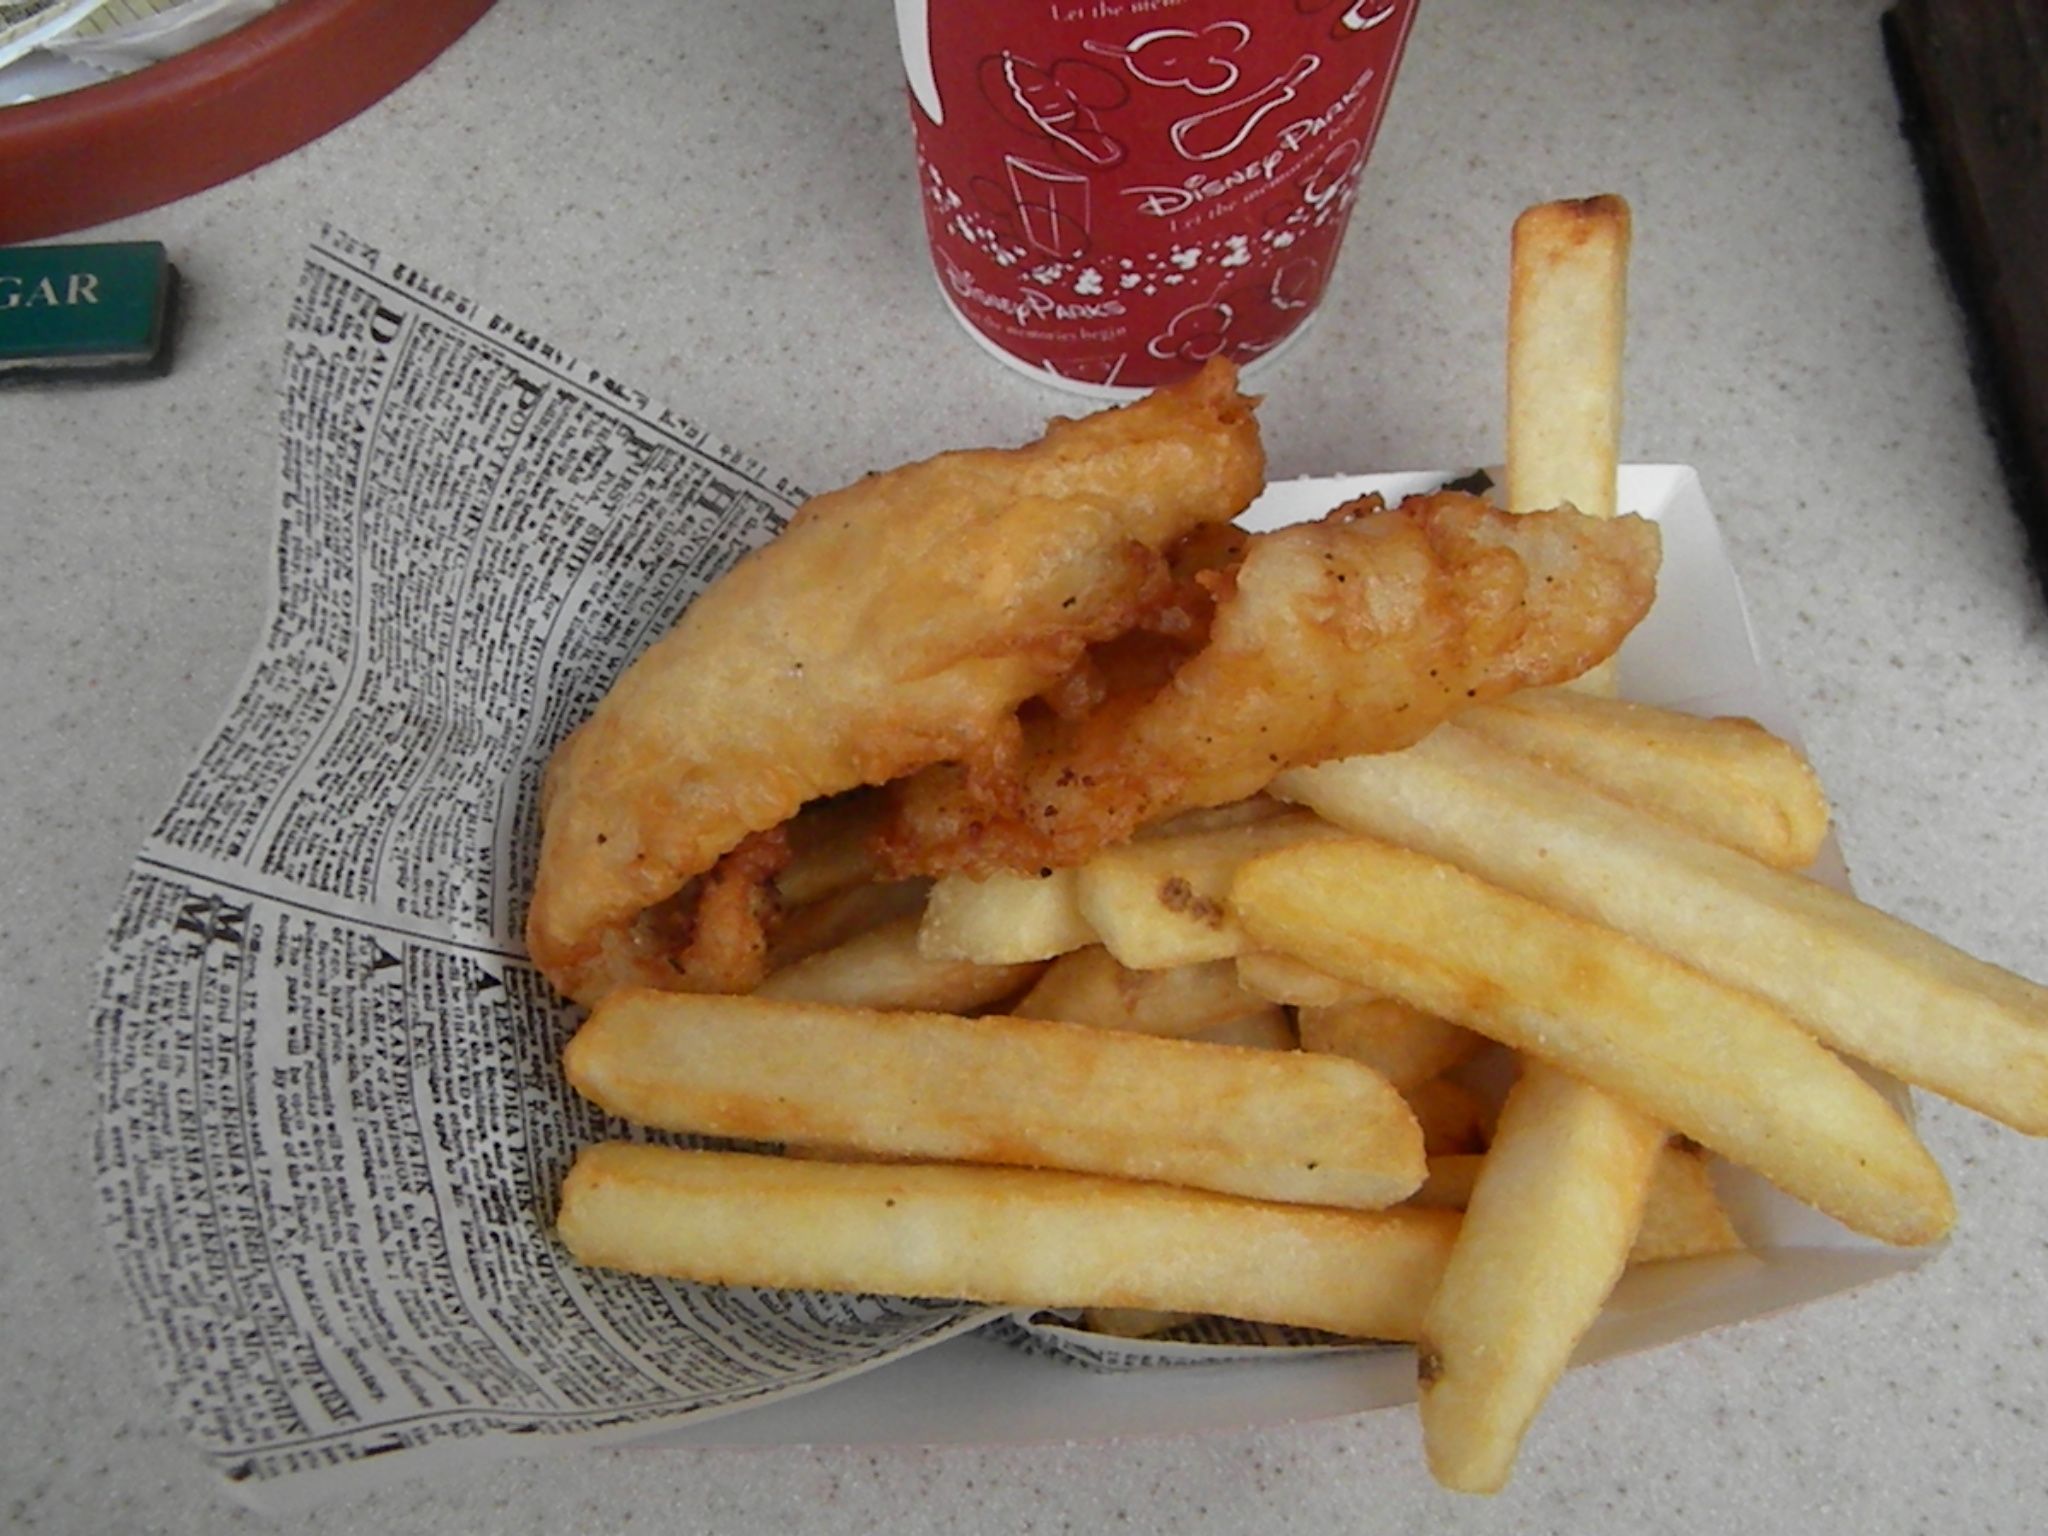 Fish & Chips, served on traditional news print. Photo by J. Jeff Kober.